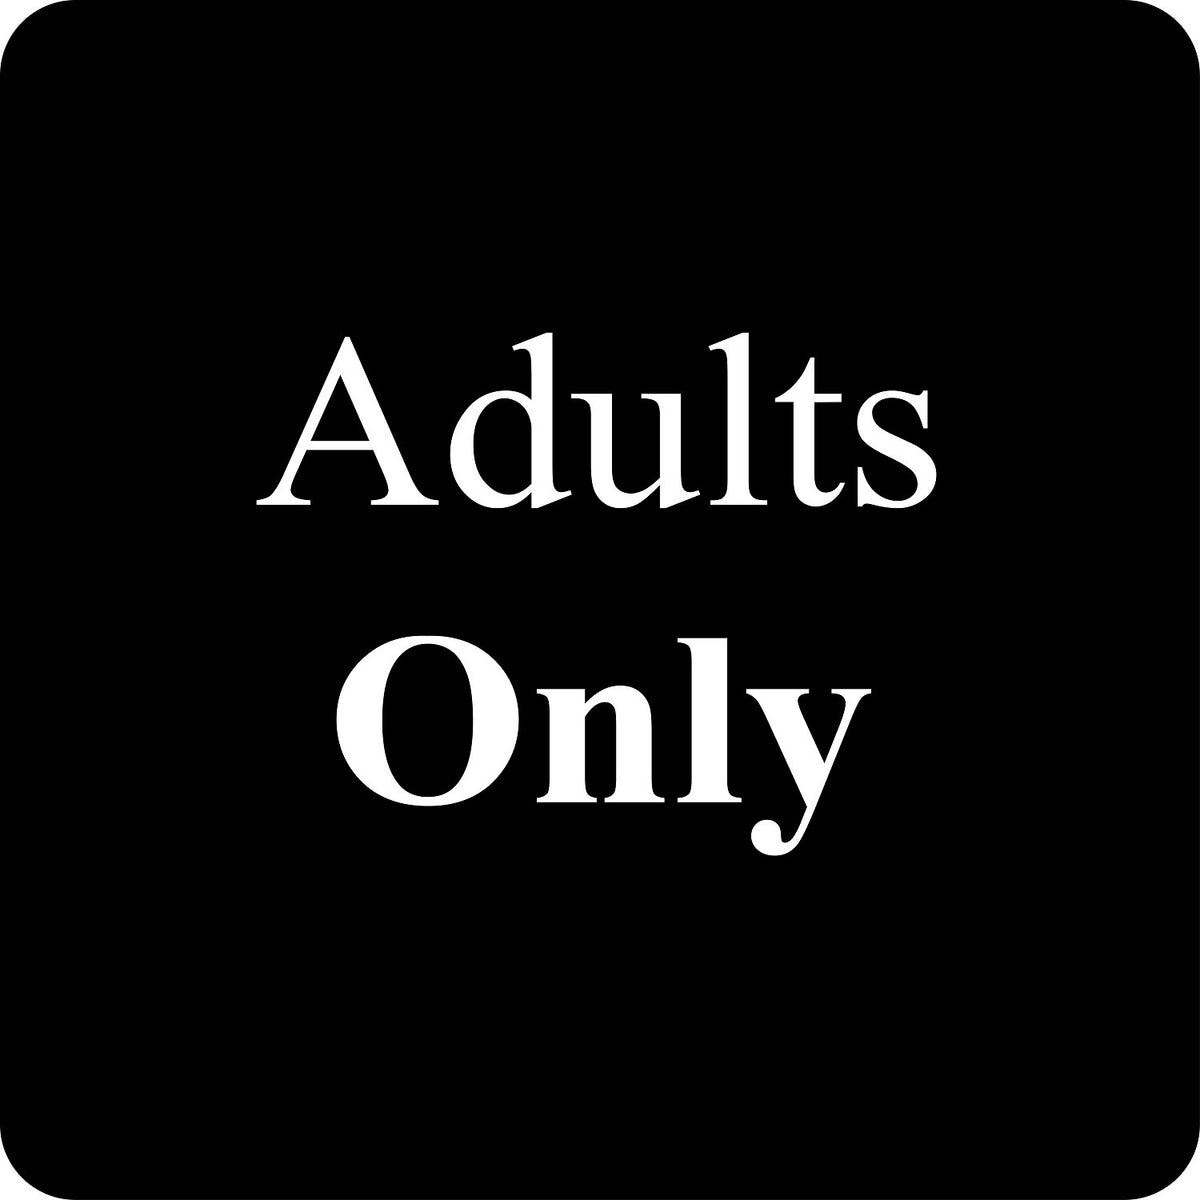 Adults Only – The Luxbox Co.